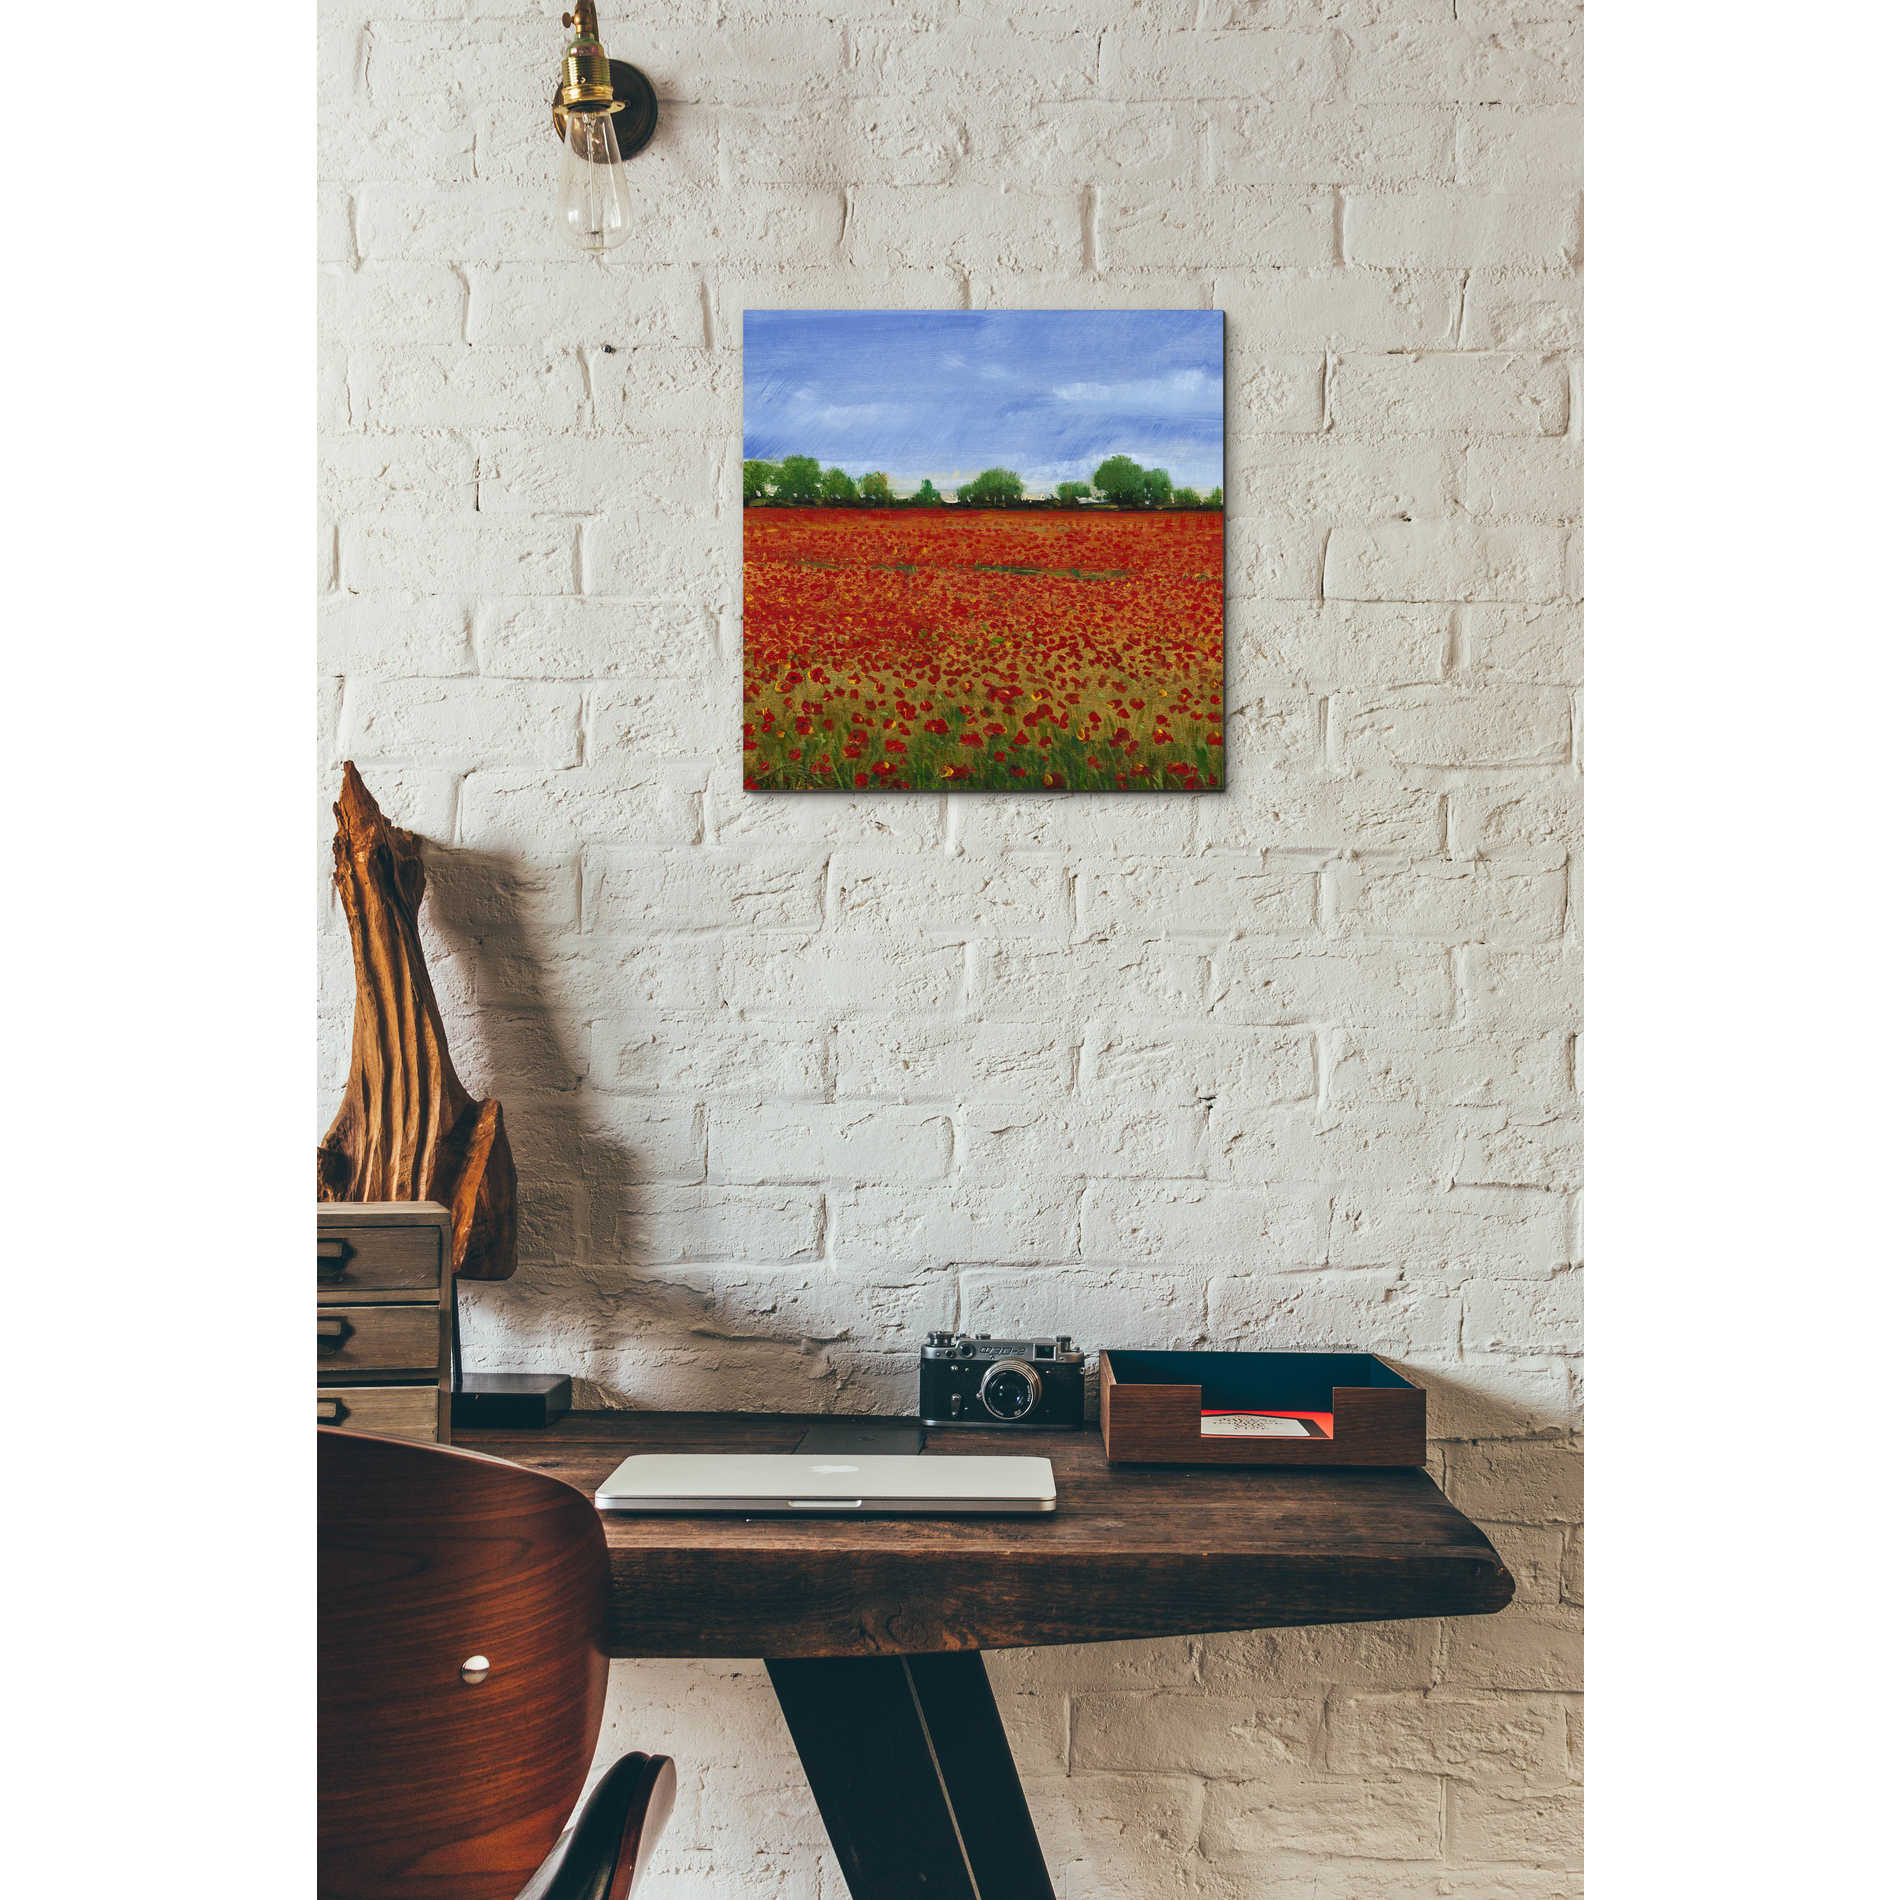 Epic Art 'Field of Poppies I' by Tim O'Toole, Acrylic Glass Wall Art,12x12